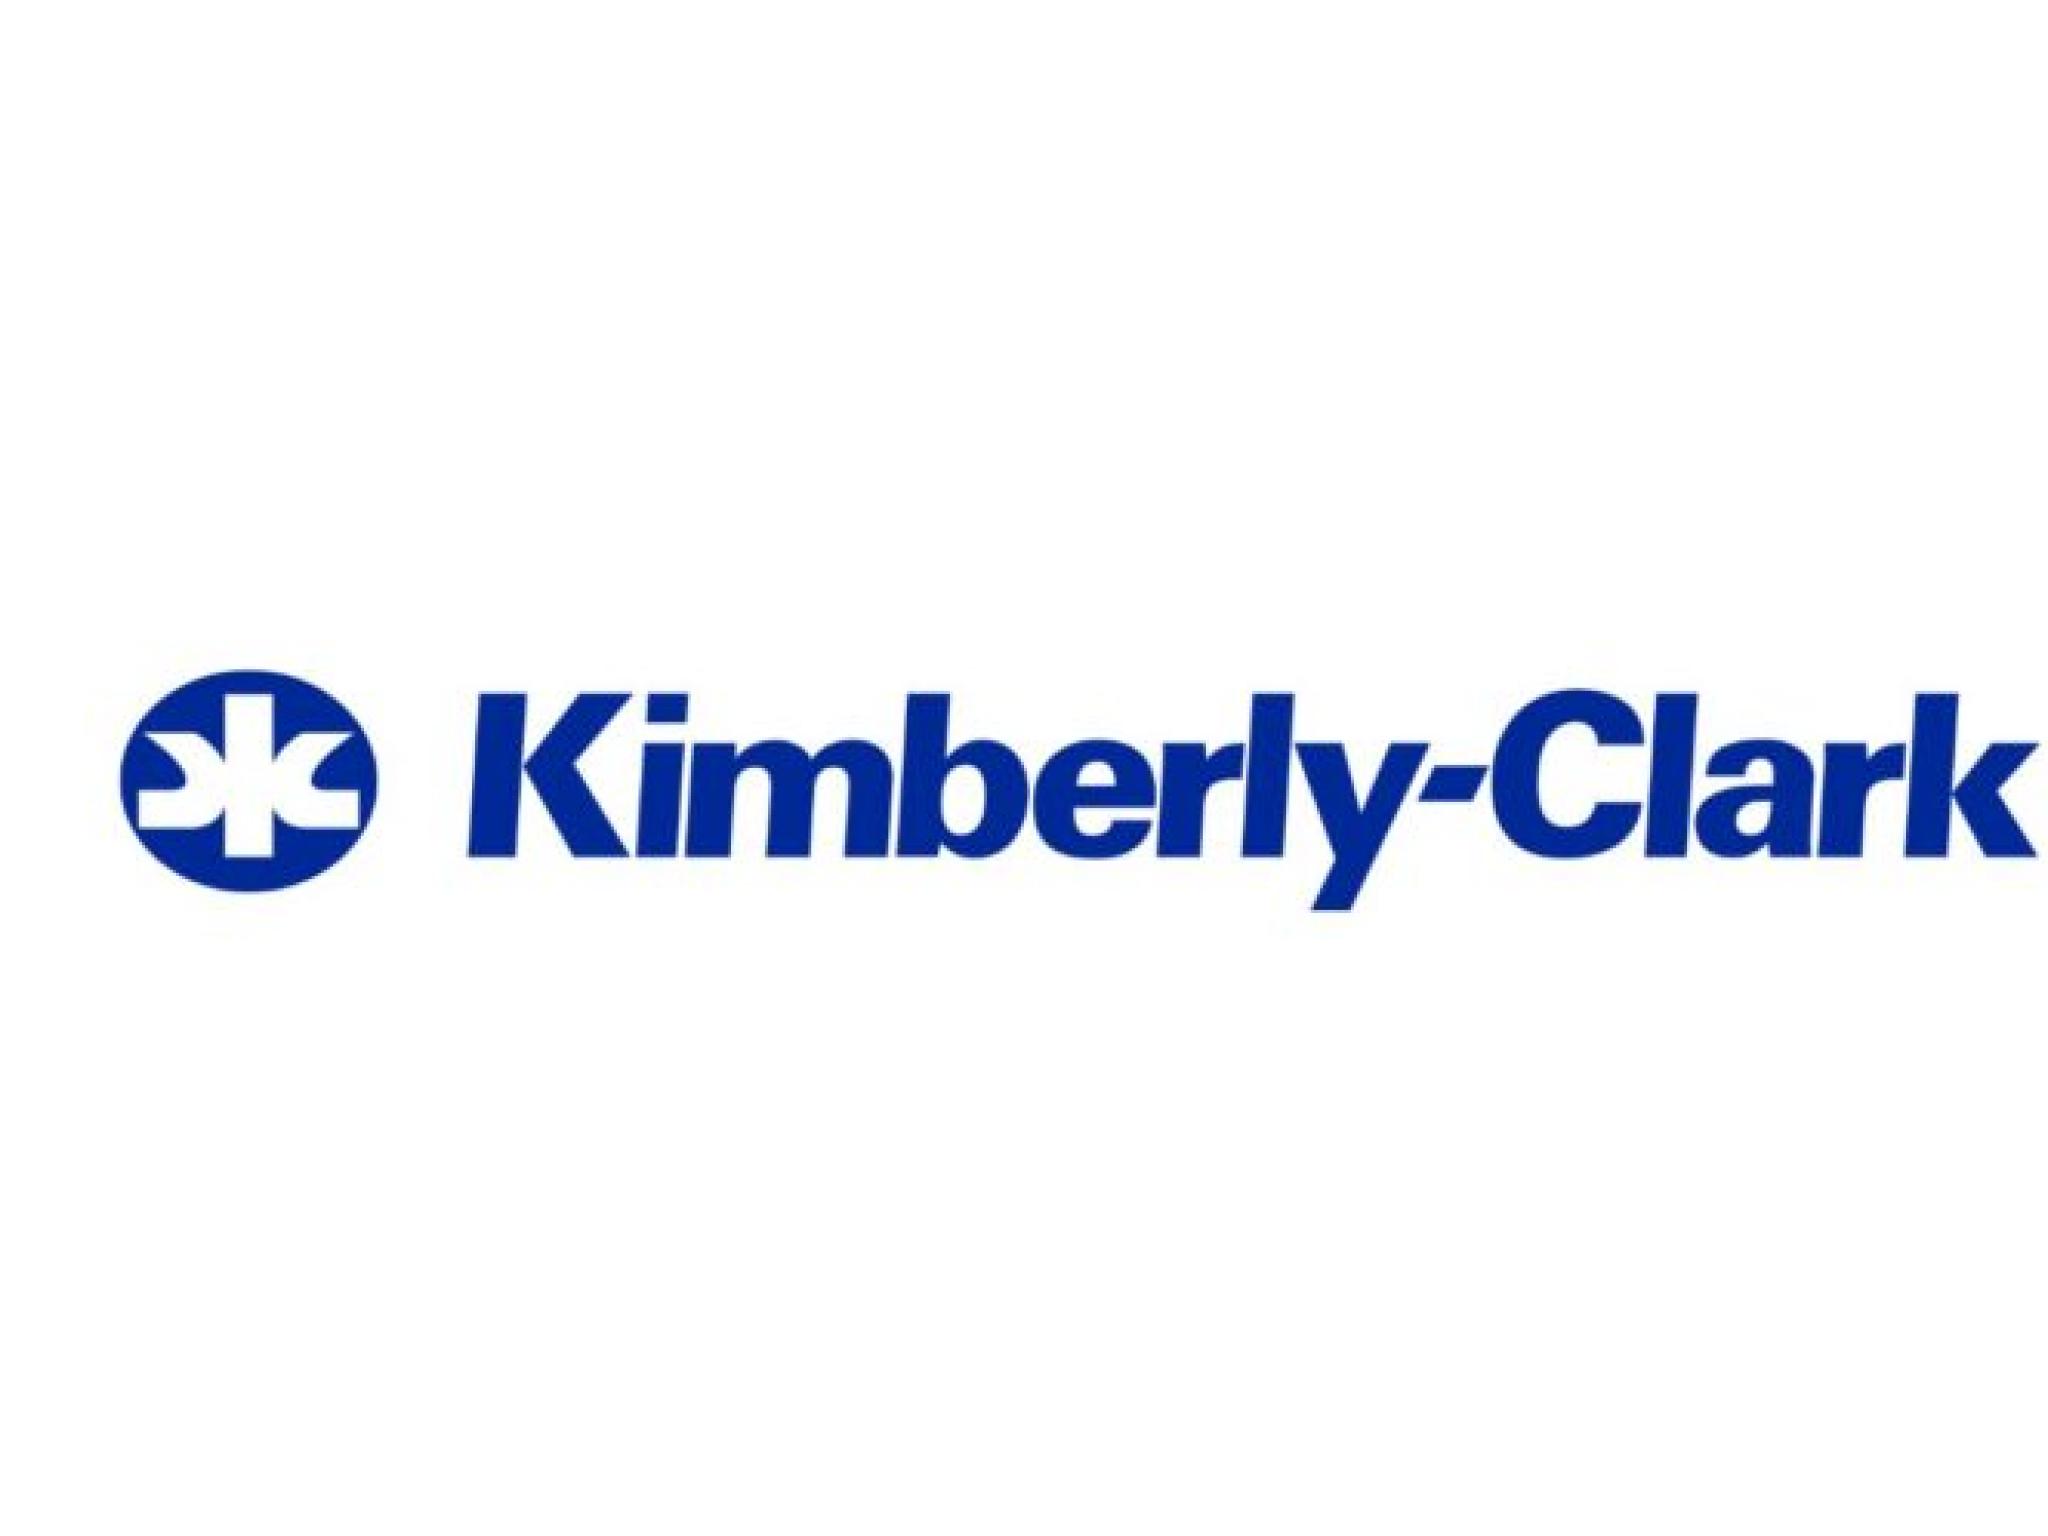  kimberly-clark-gets-a-double-upgrade-by-this-analyst-gross-margins-could-reach-40-by-2030 